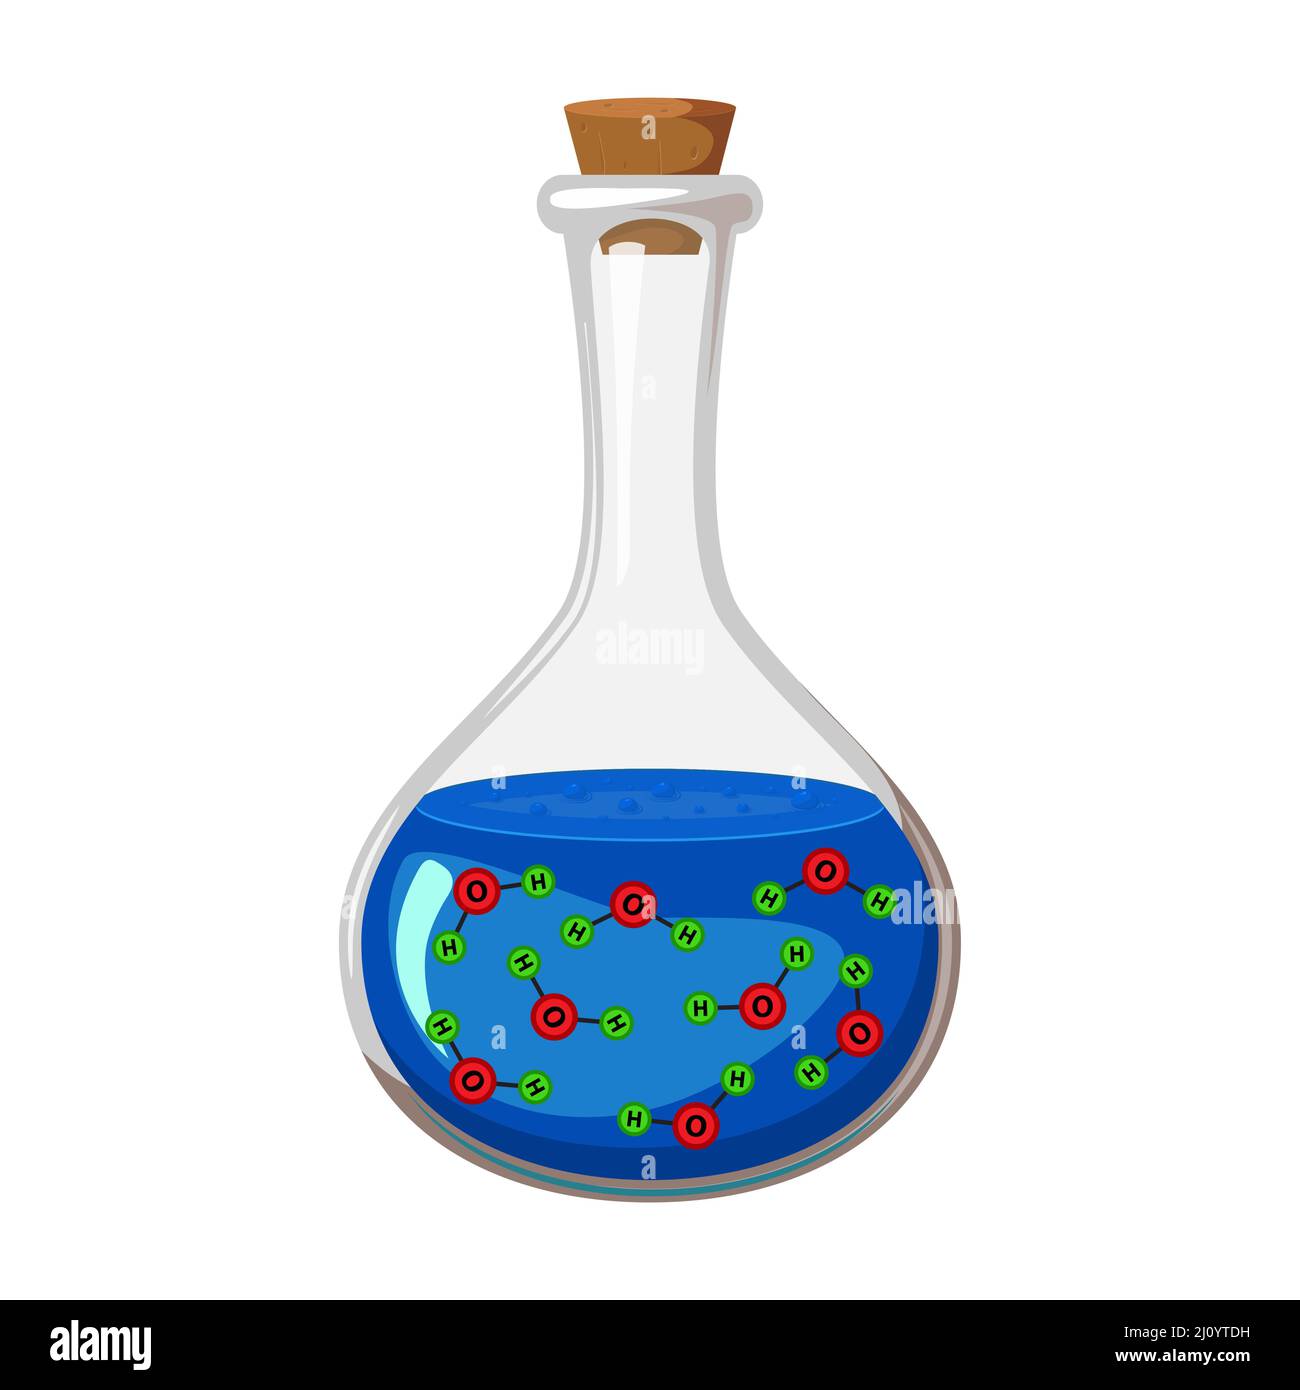 H2O molecule in test tube. Water matter icon. Vector illustration isolated on white background Stock Vector